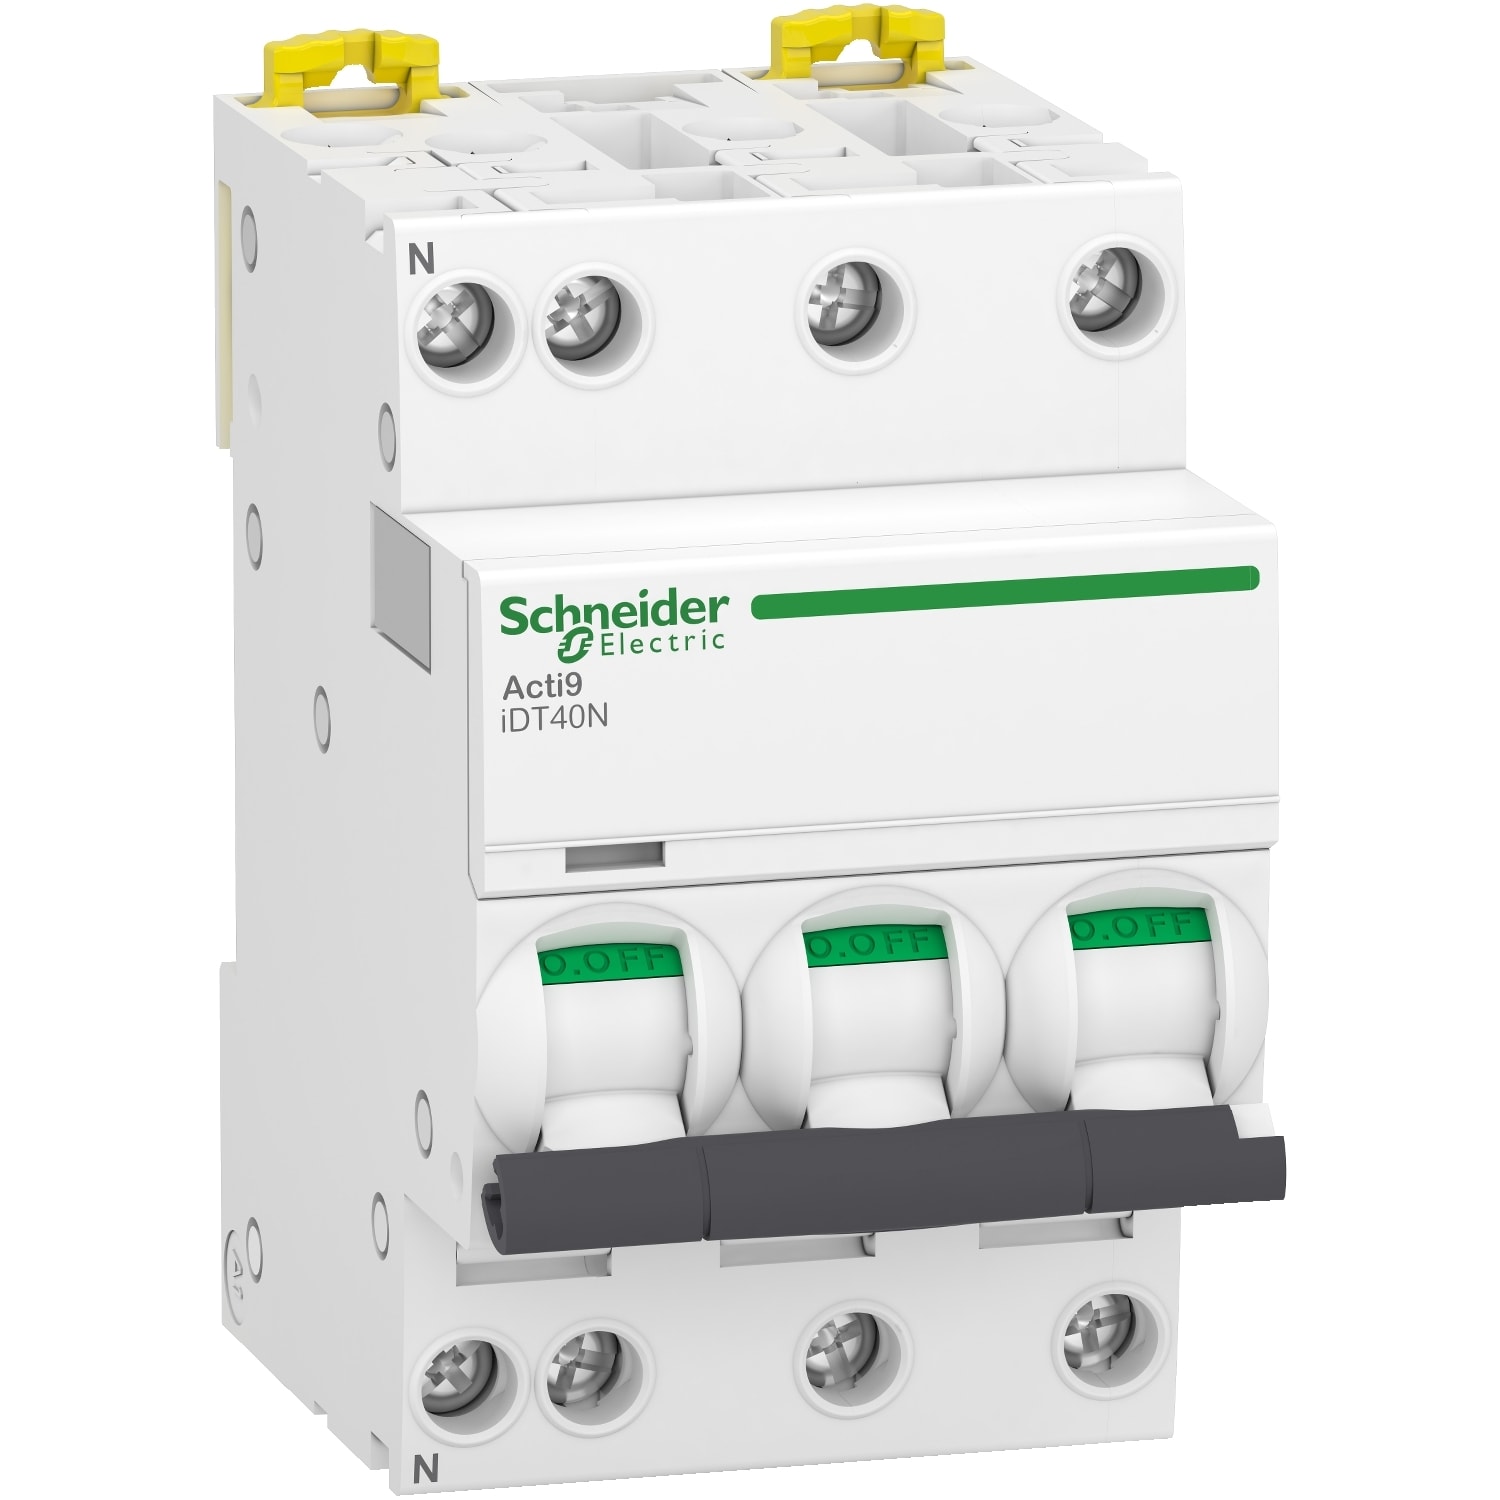 Schneider Electric - Acti9 iDT40N - Disjoncteur modulaire - 3P+N - 6A - Courbe C - 6000A-10kA